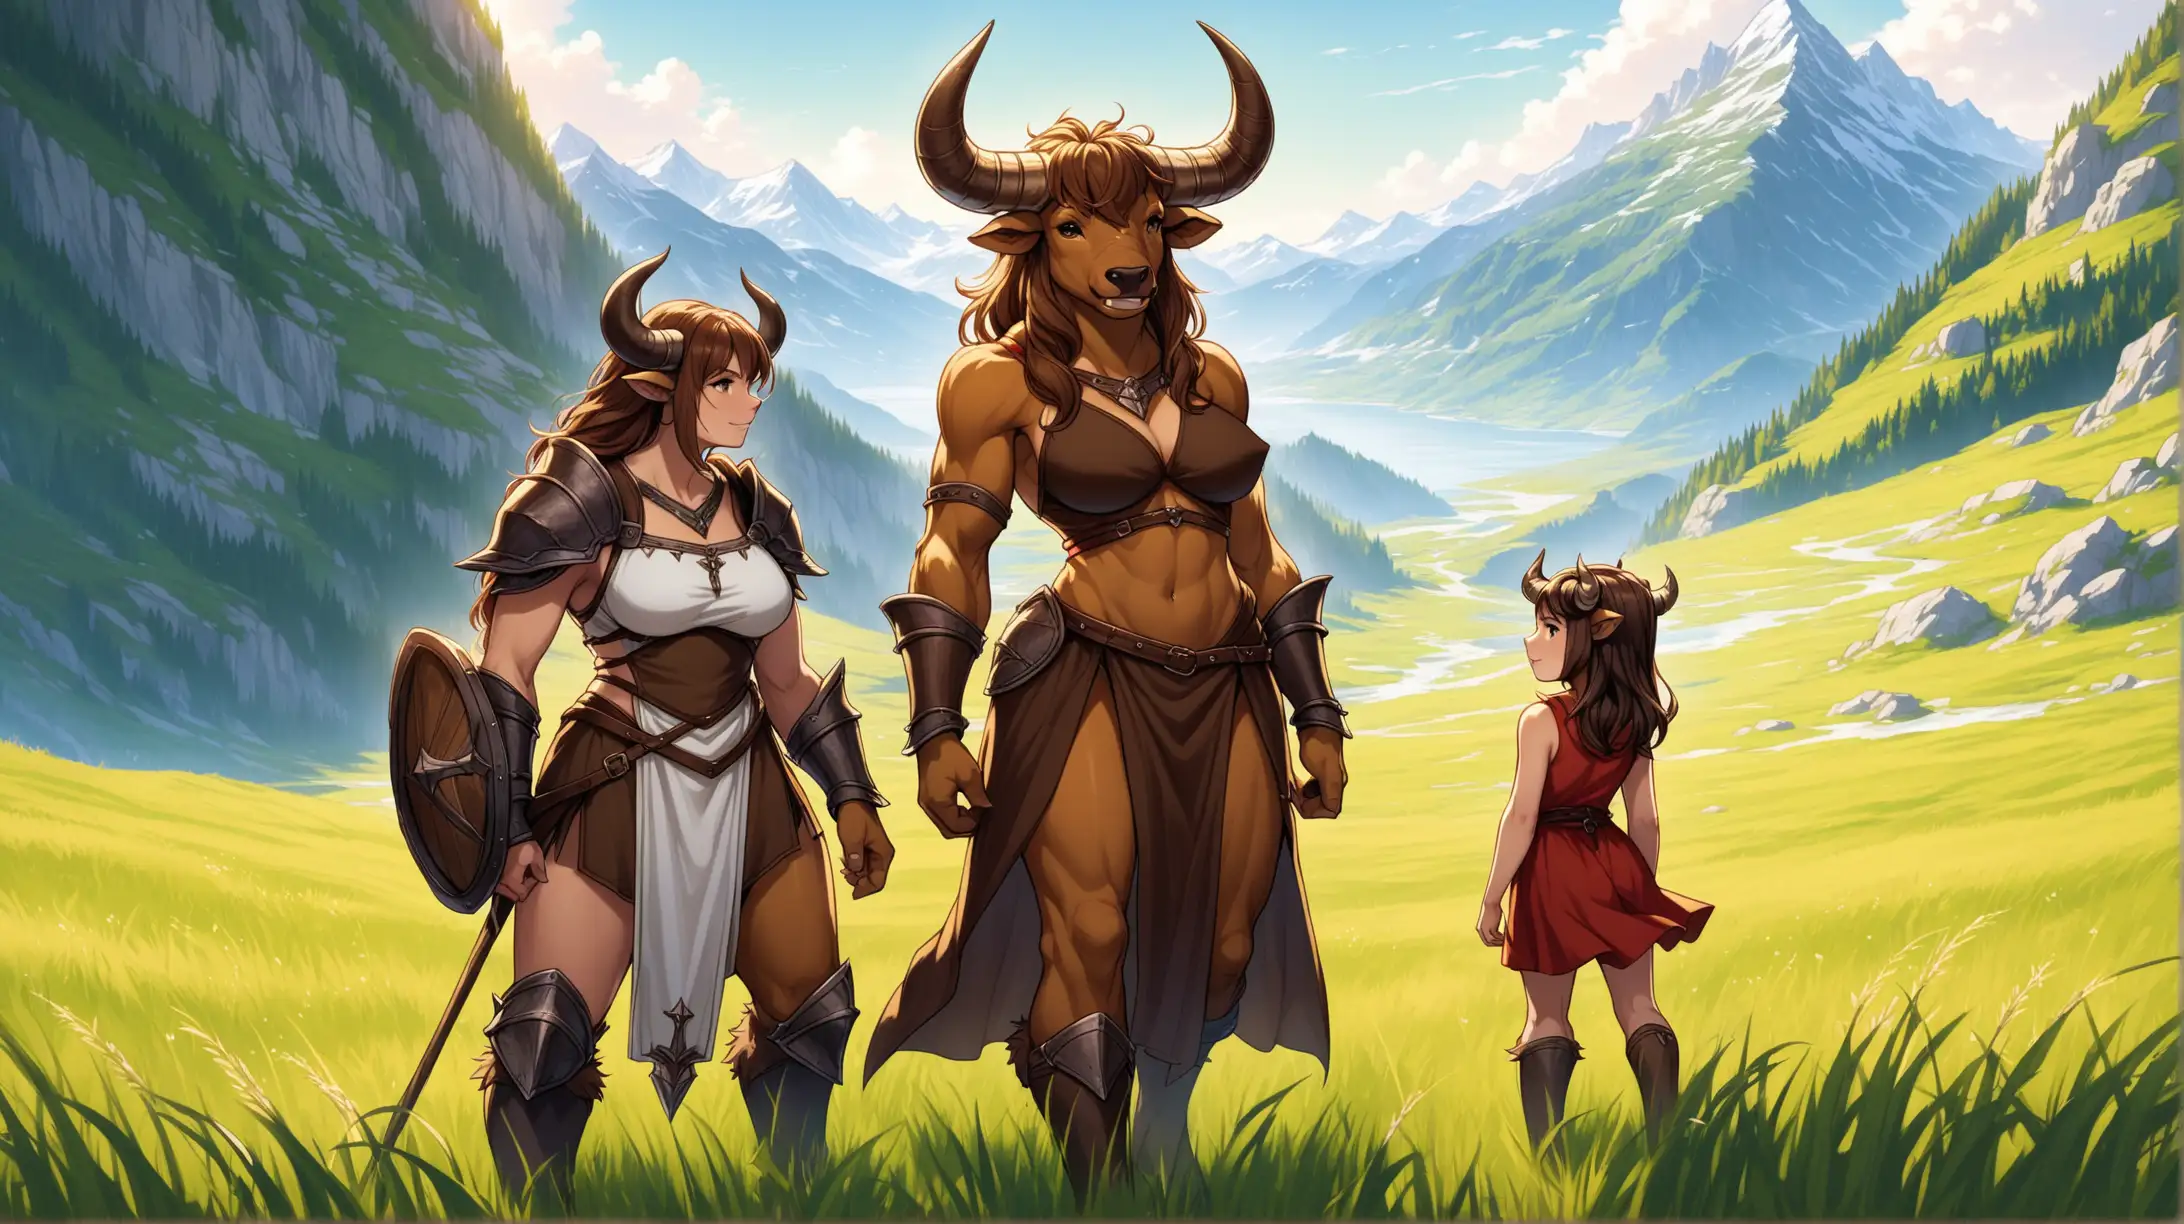 Medieval Fantasy Art Furry Minotaur Mother and Daughter in Mountain Grass